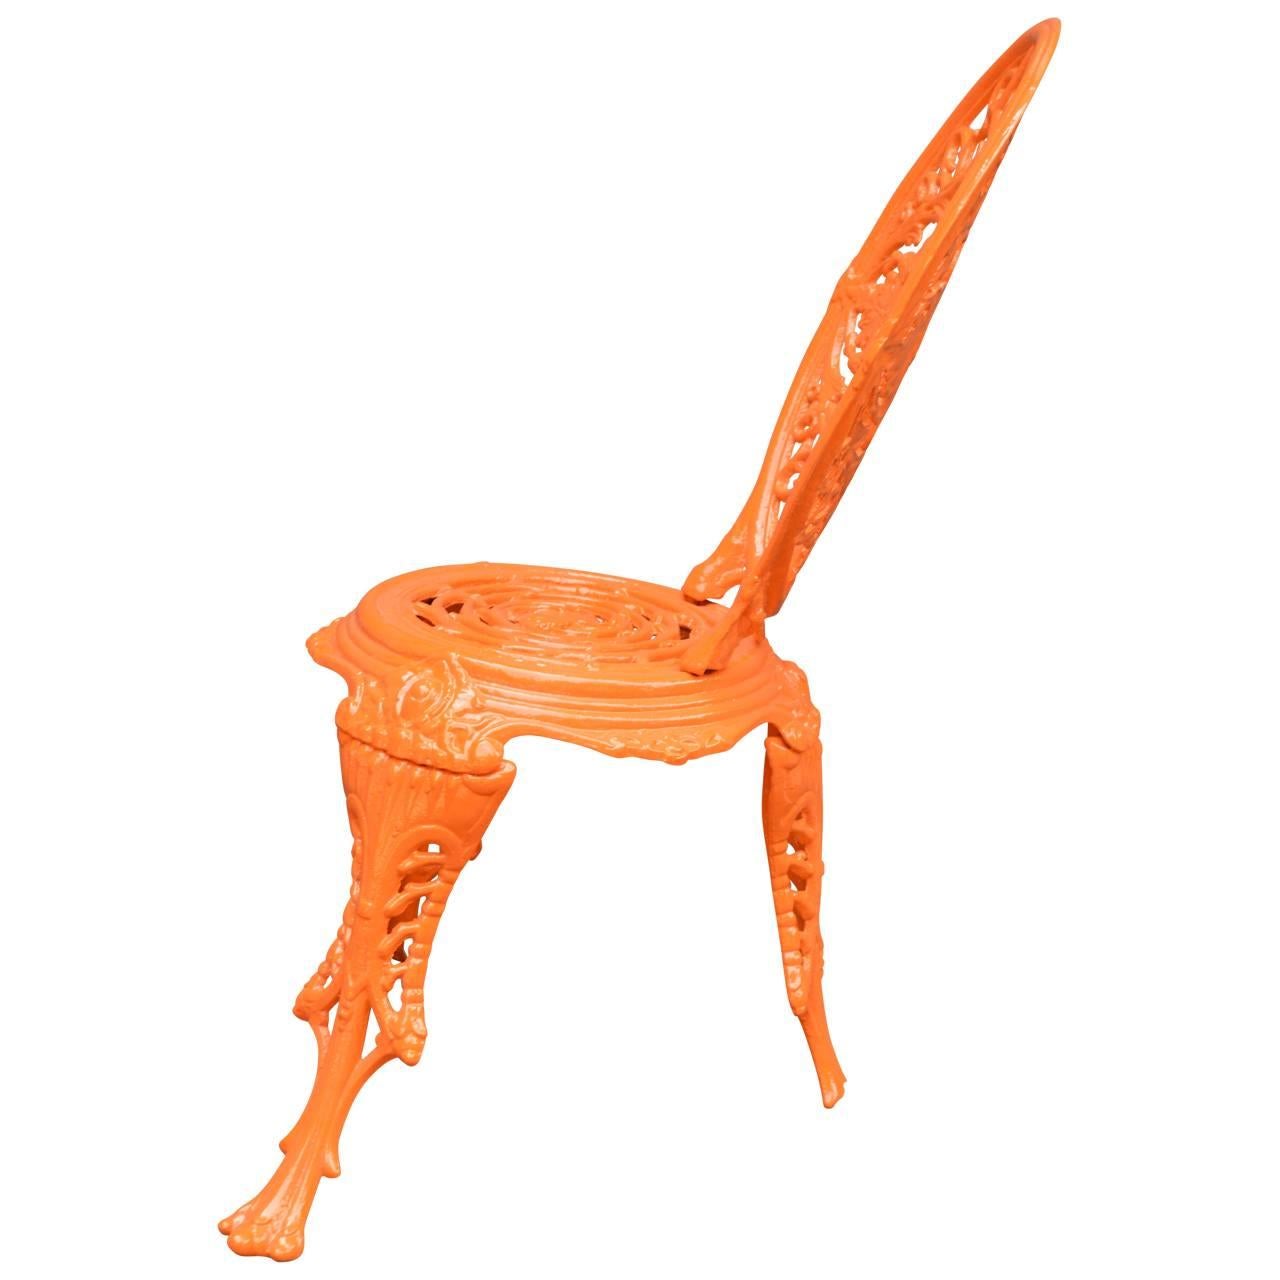 English cast iron chair, in newly powder-coated bright orange.